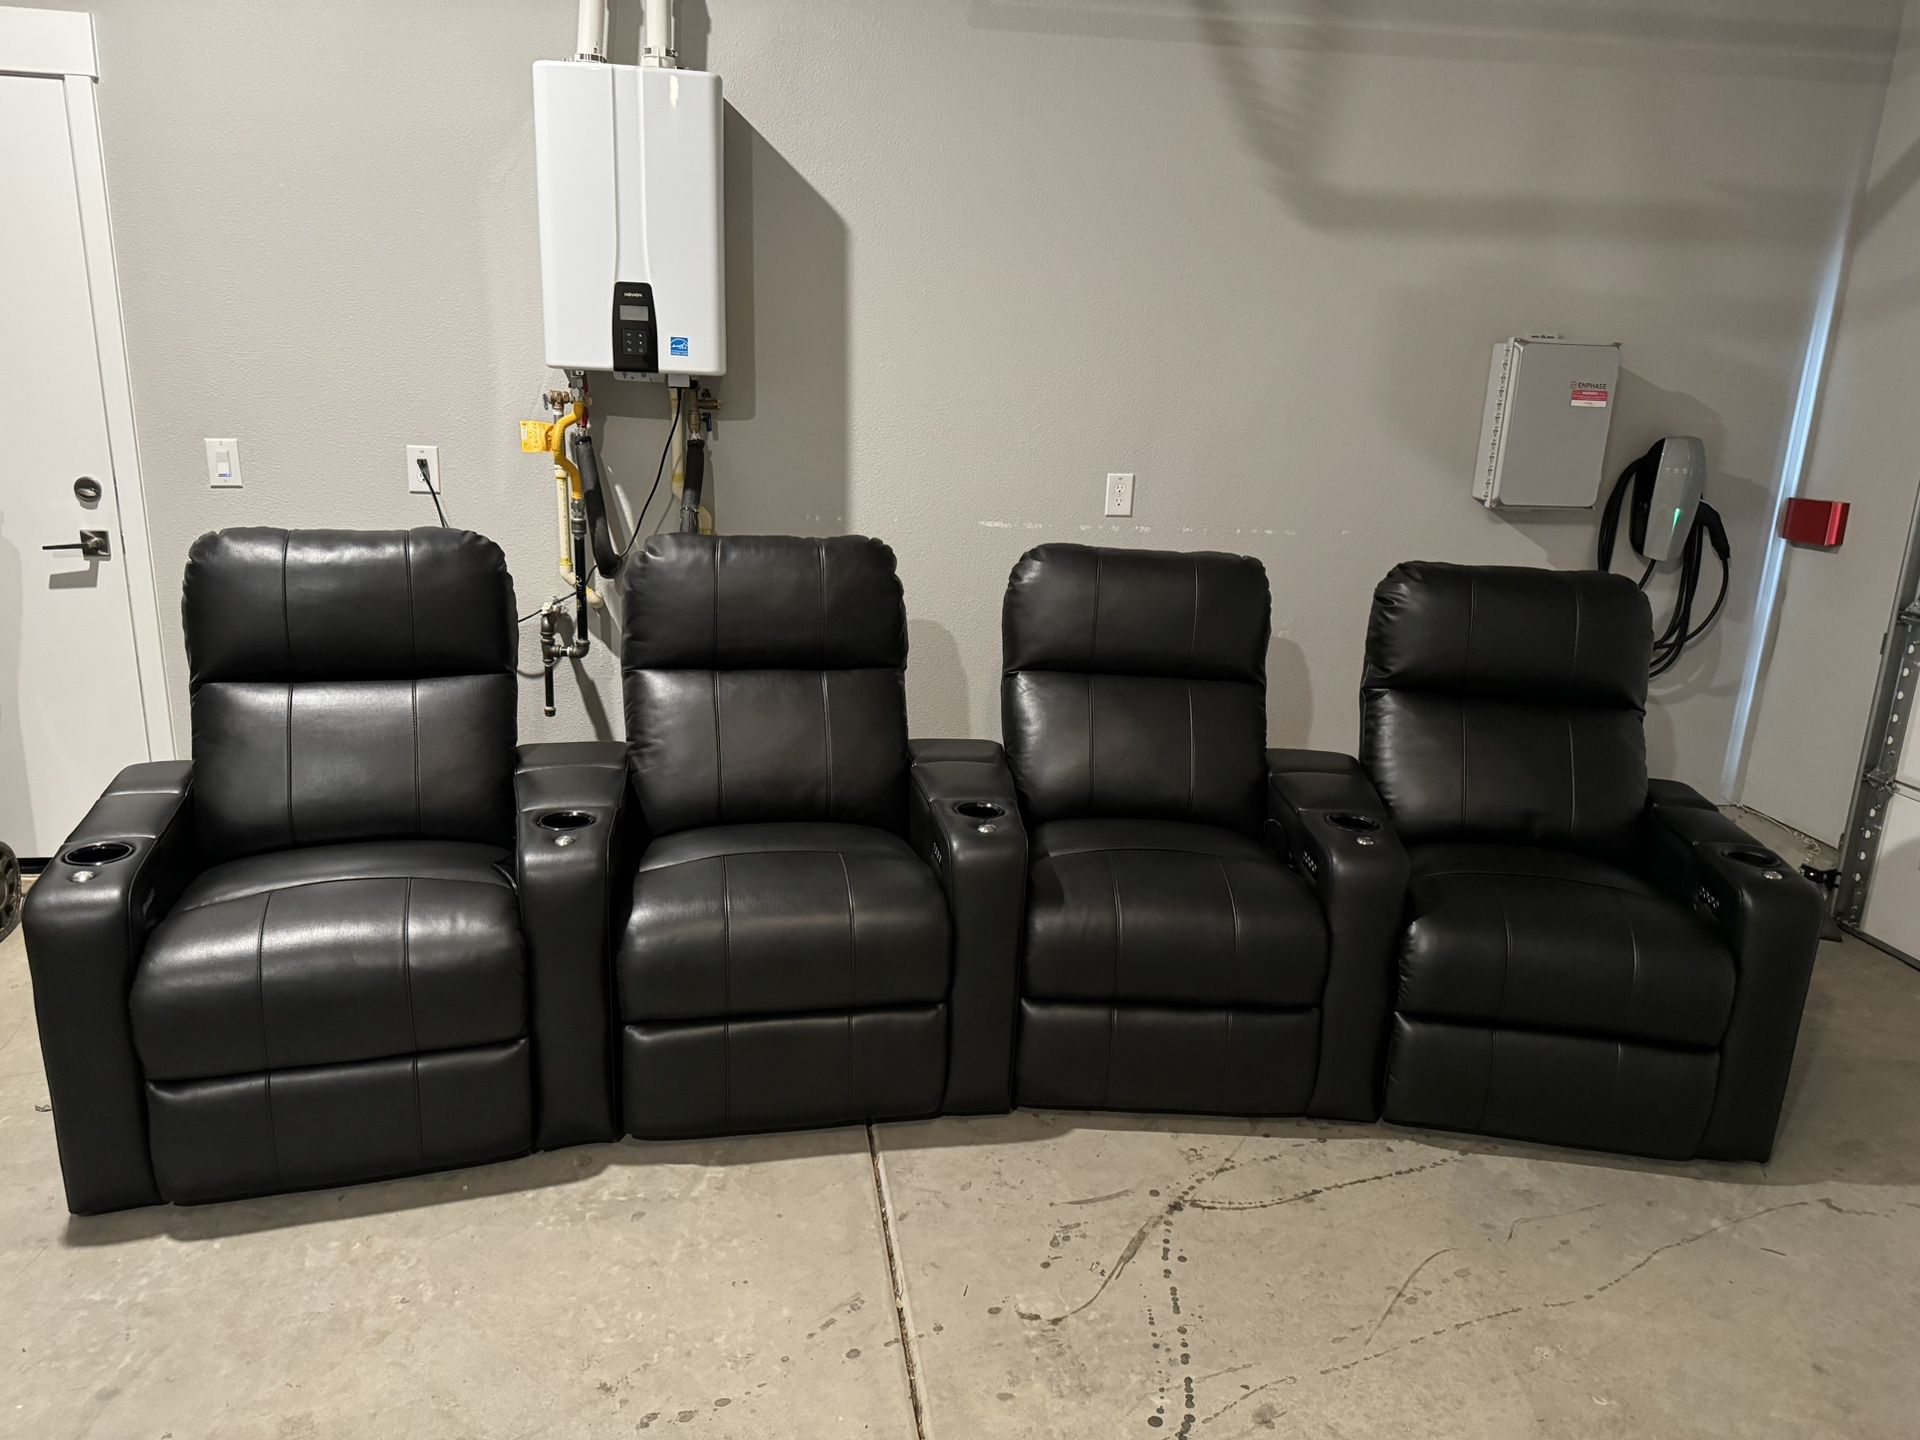 Power Theatre  Recliner Chairs (Set Of 4)